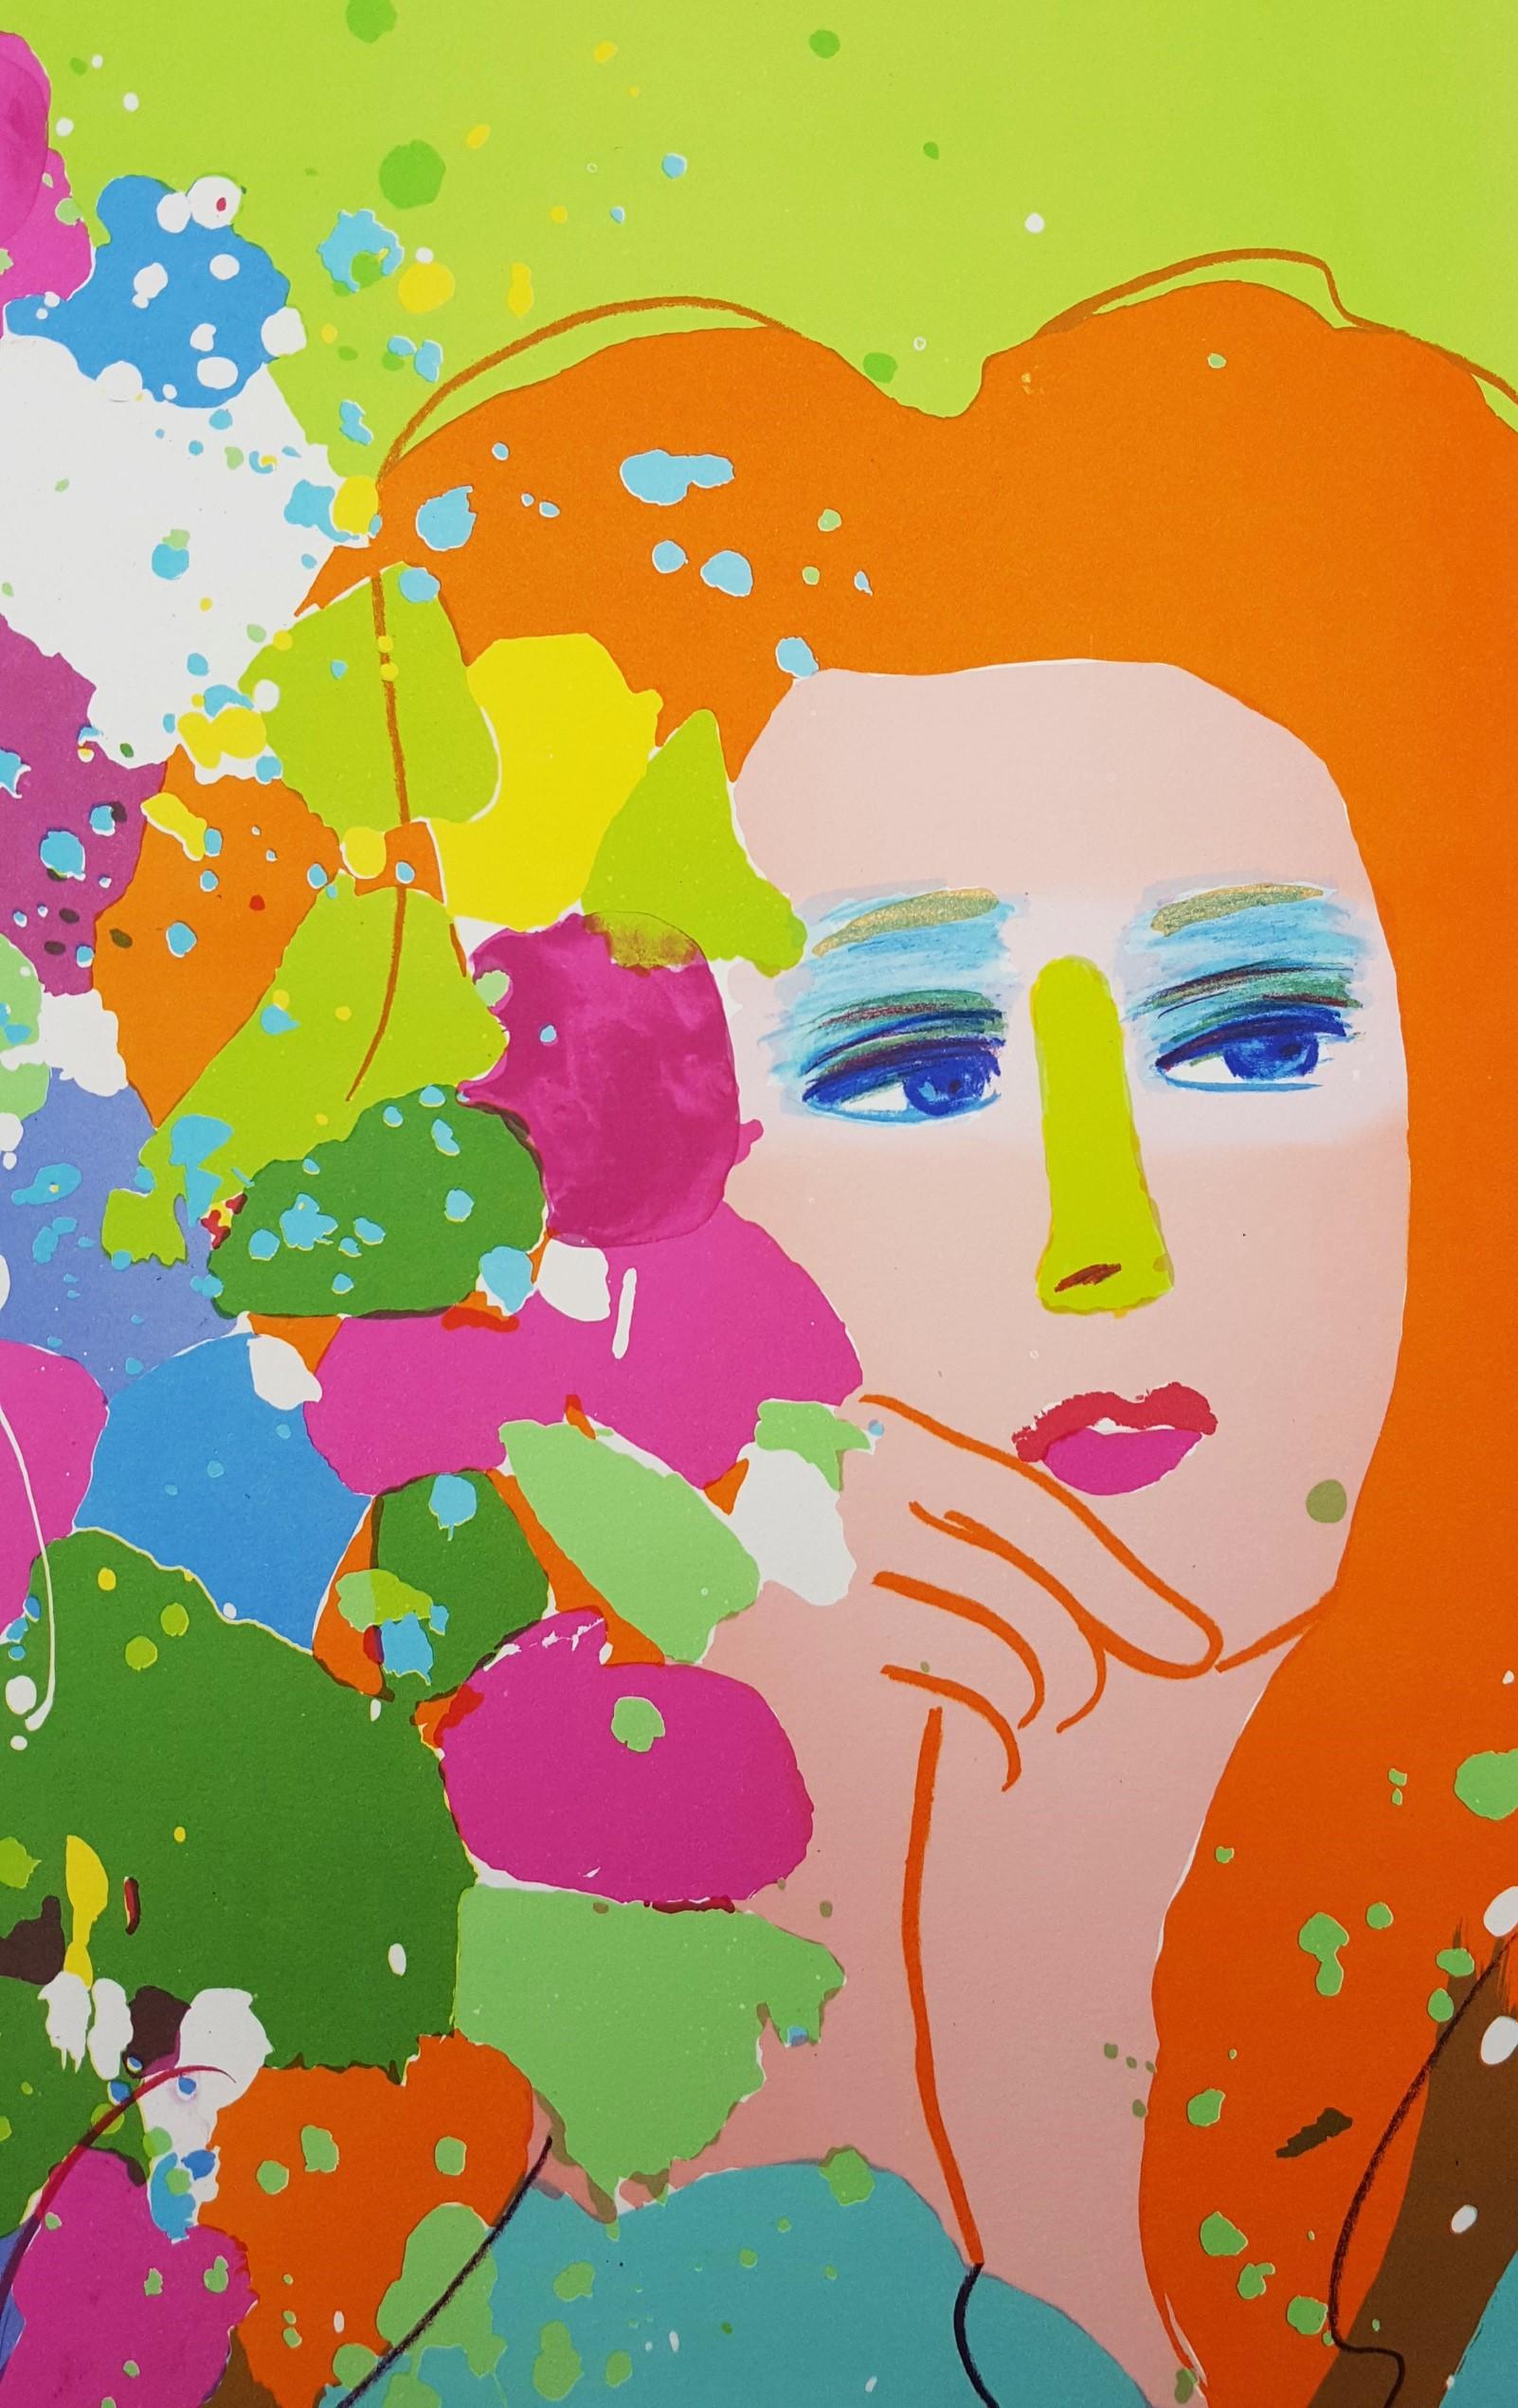 Lady with Flowers /// Pop Art Walasse Ting Buntes Mädchen Abstrakte Lithographie Kunst im Angebot 10